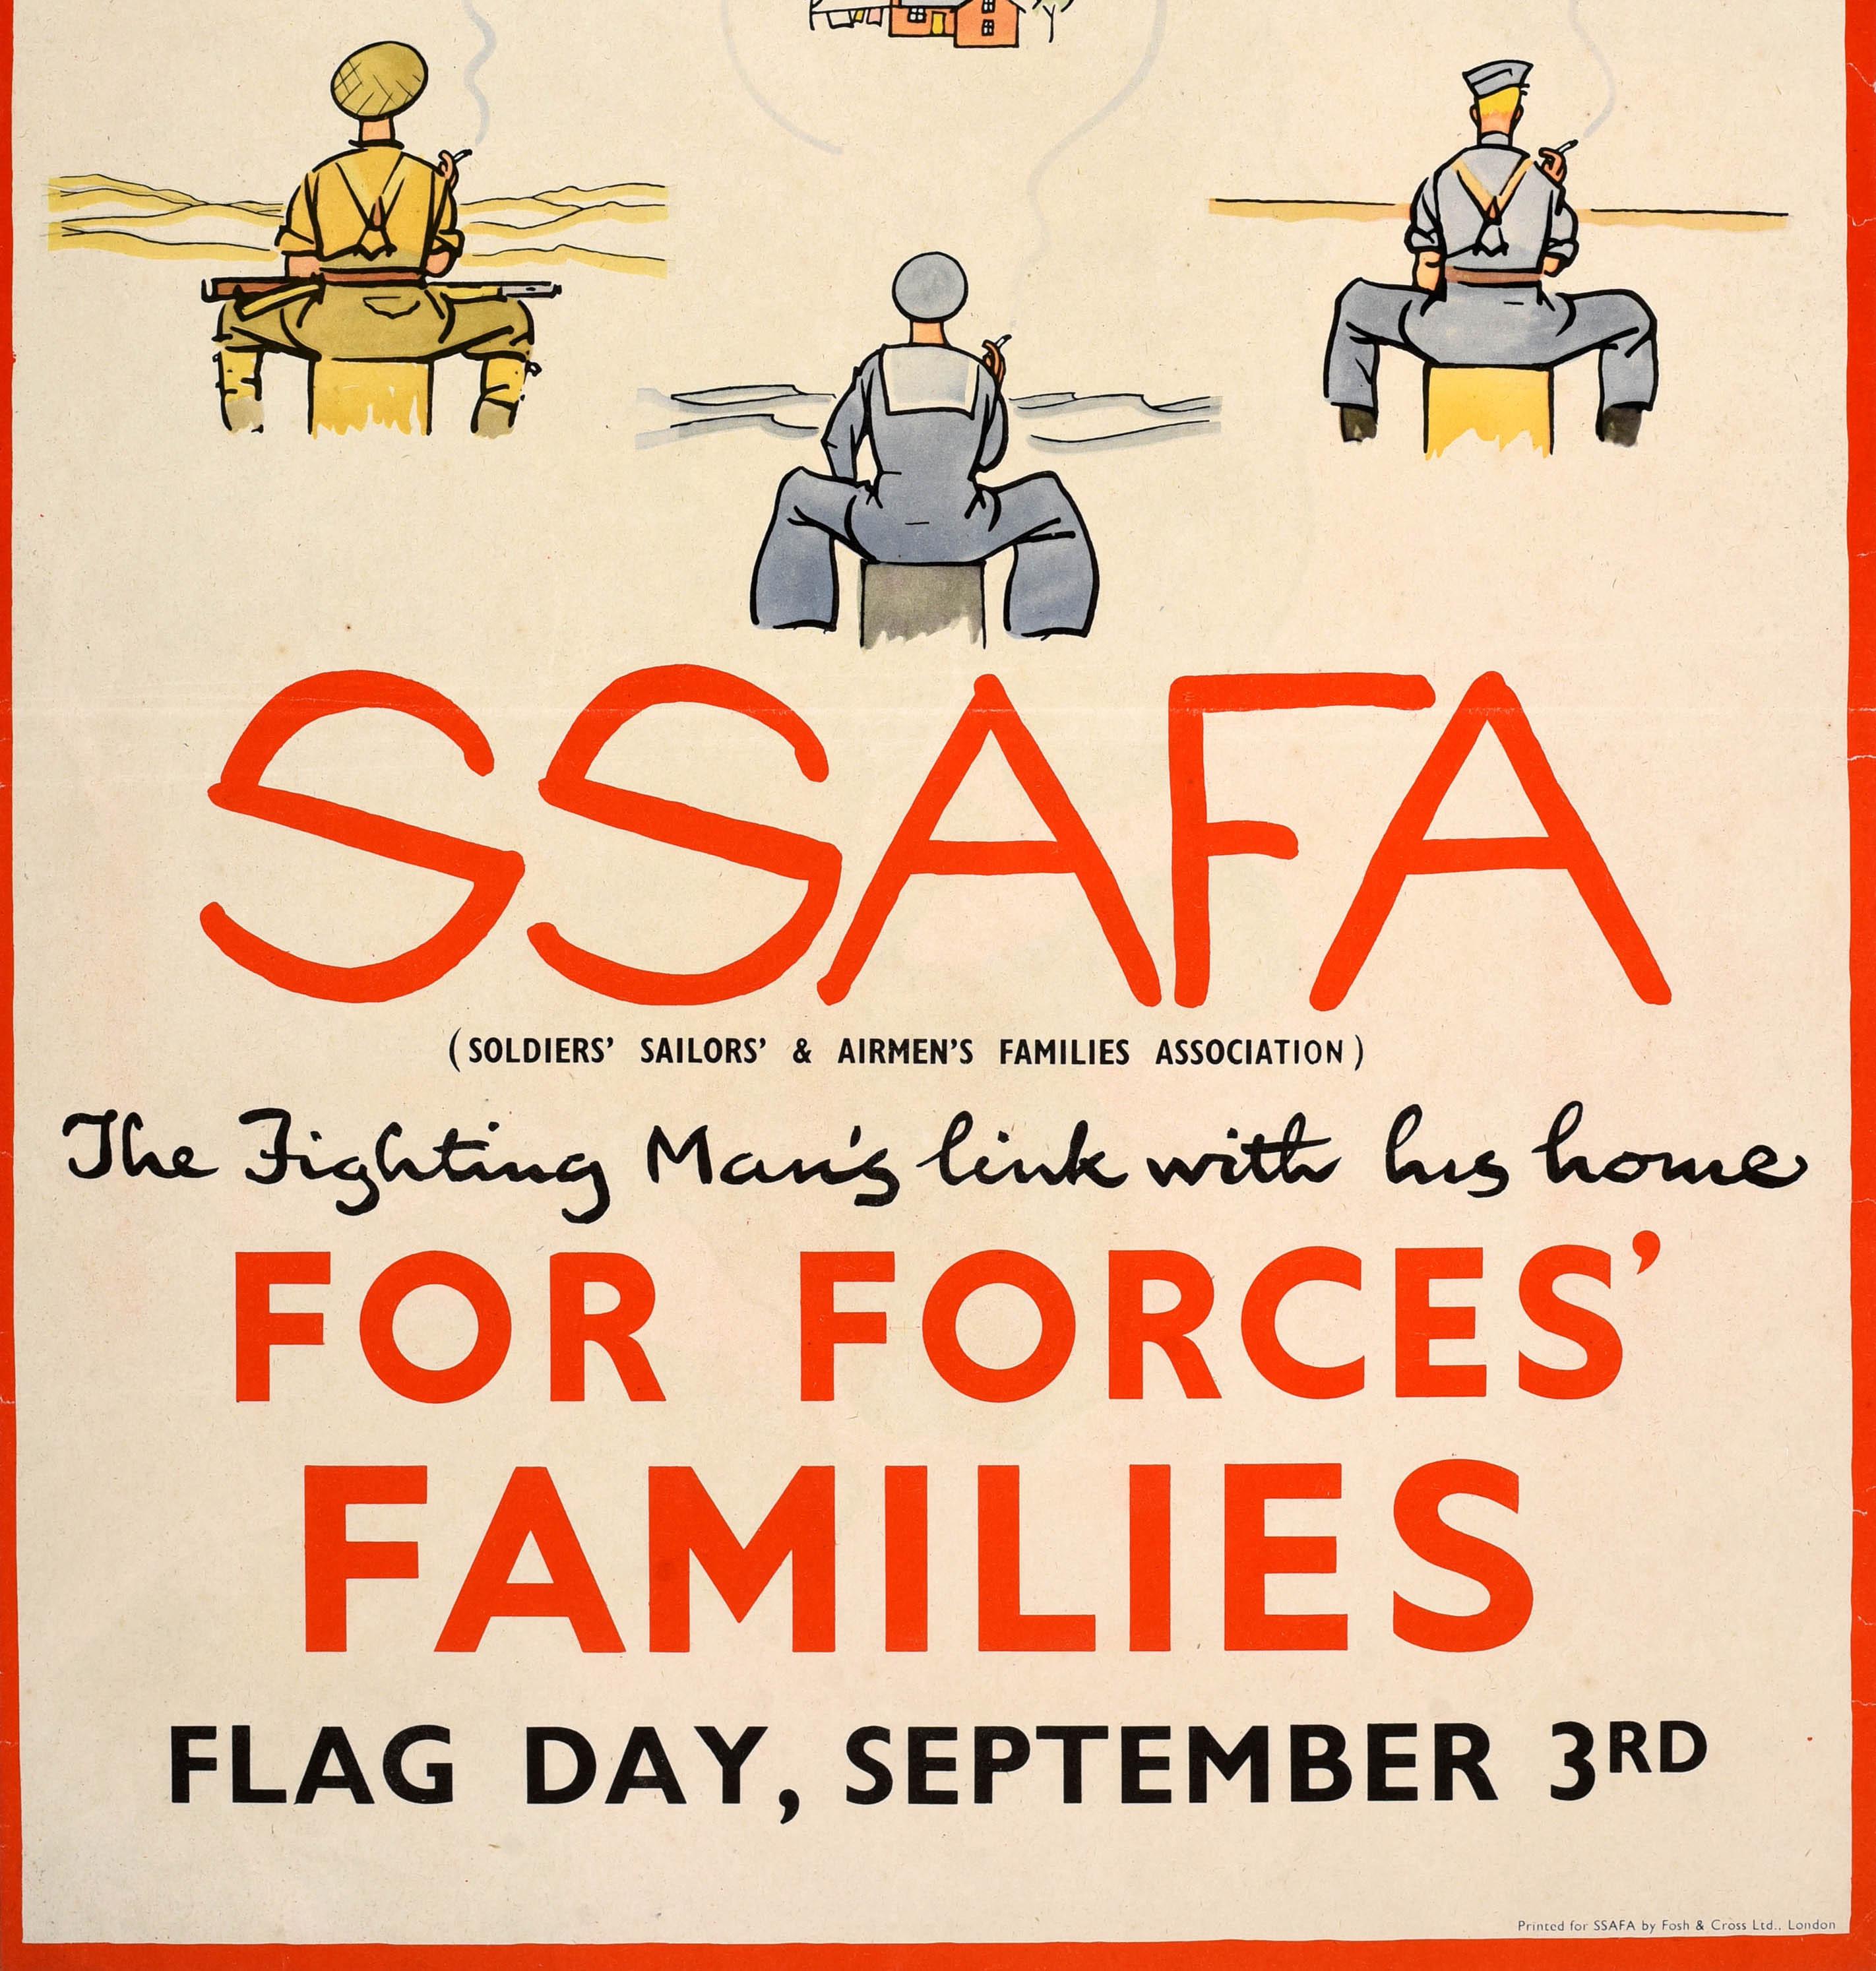 Original Vintage WWII Poster SSAFA Soldiers Sailors Airmen Families Association - White Print by Fougasse (Cyril Kenneth Bird)